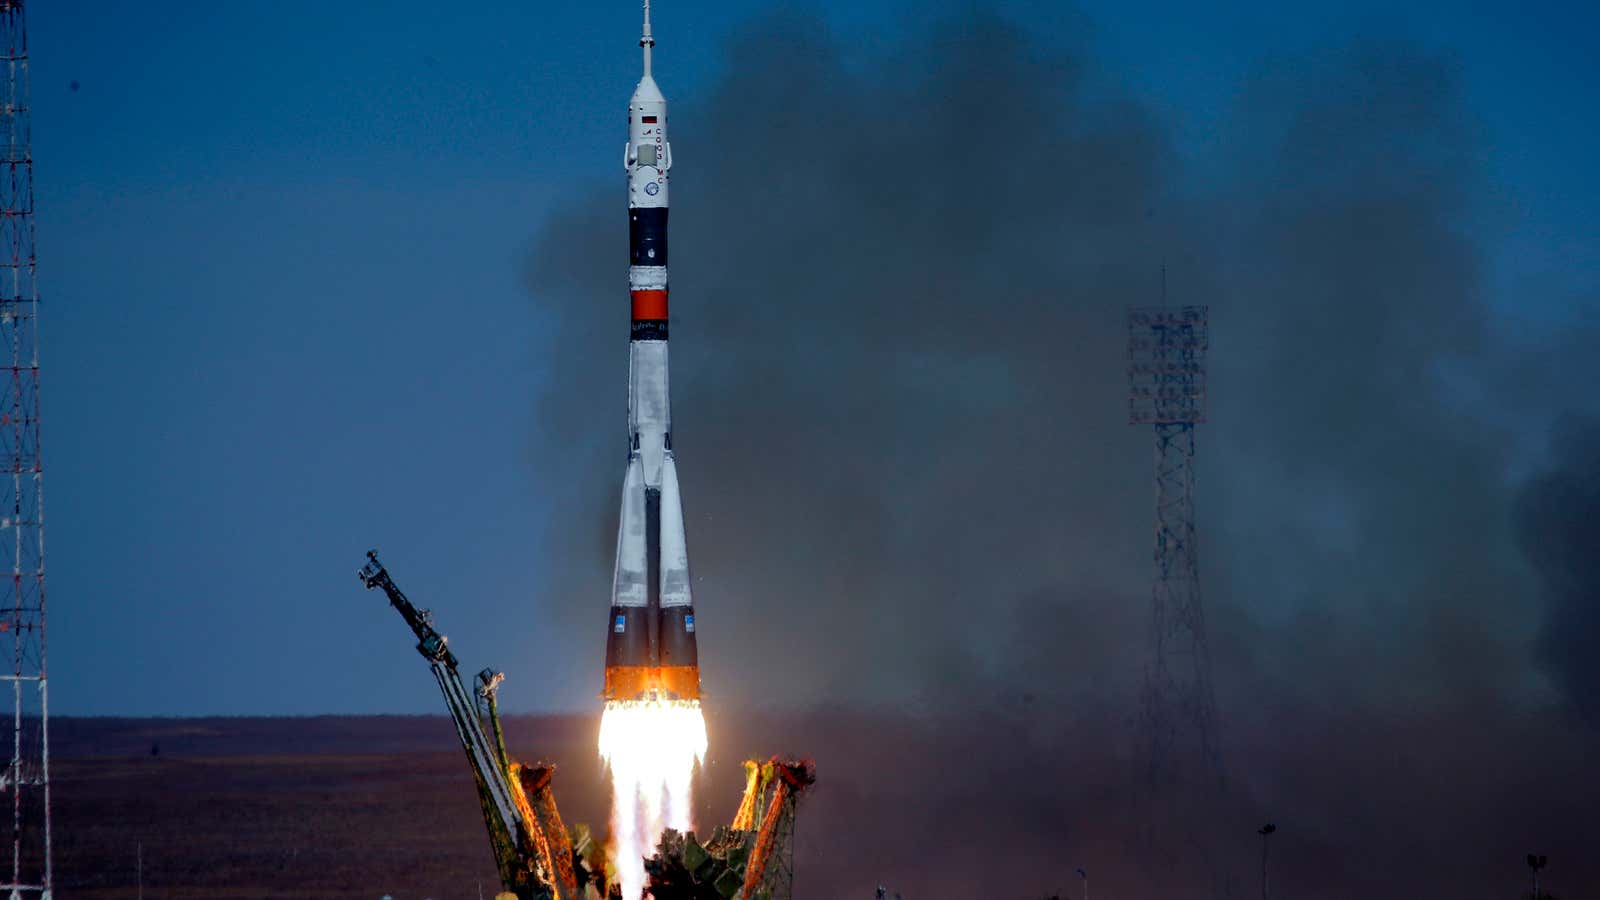 The Soyuz rocket lifts off moments before the accident that destroyed it.